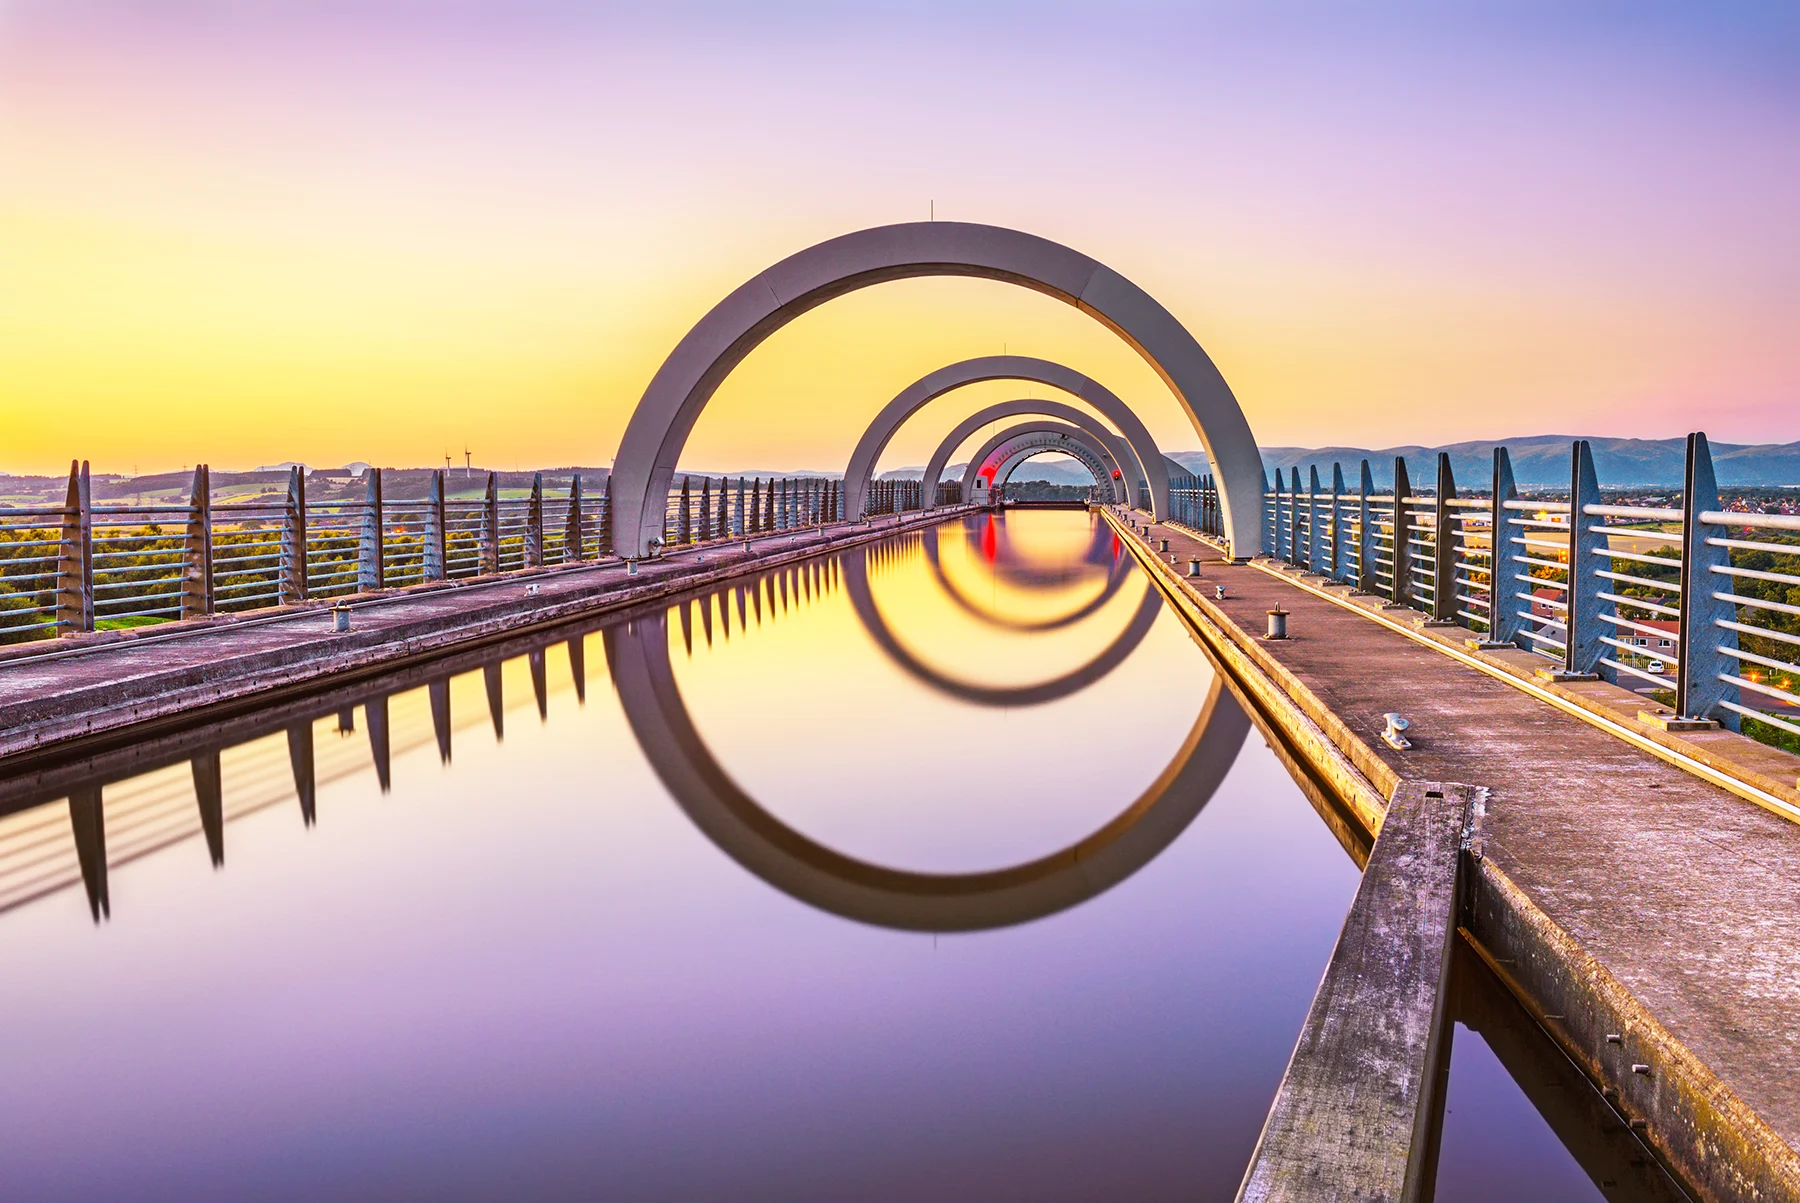 A water-filled concrete walkway with semi circular arches reflected in the water, at dusk. 